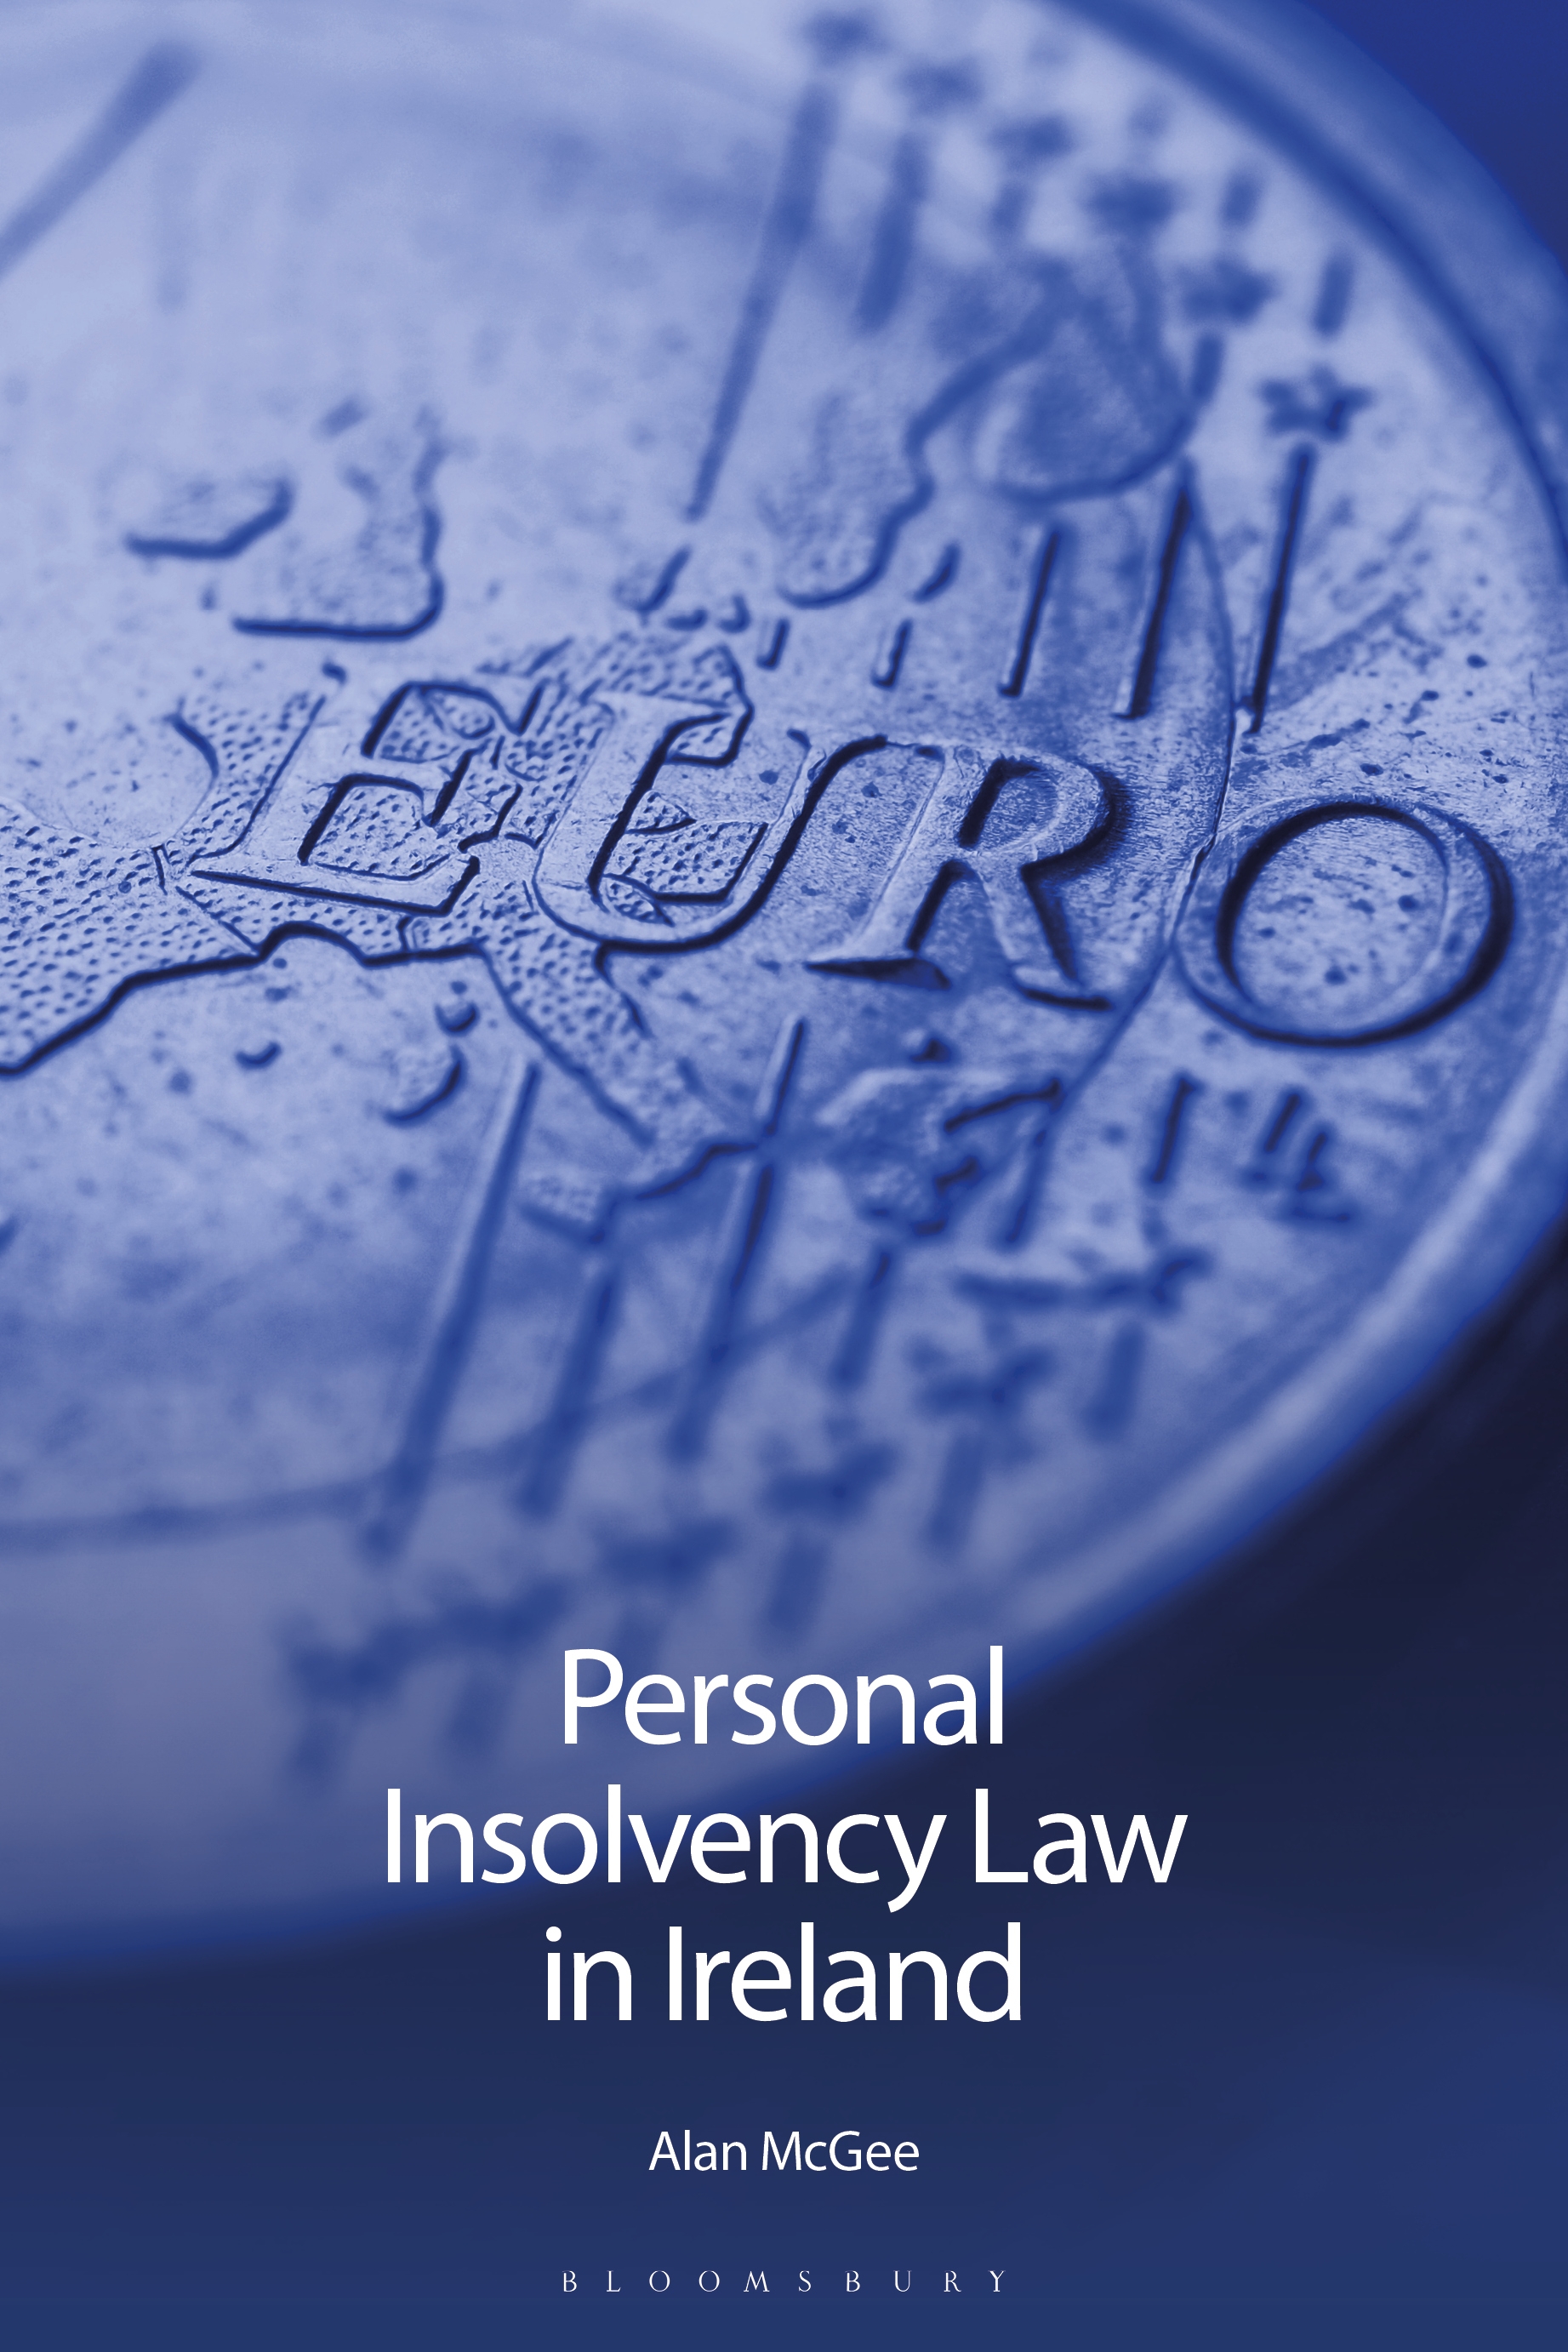 Personal Insolvency Law in Ireland book jacket